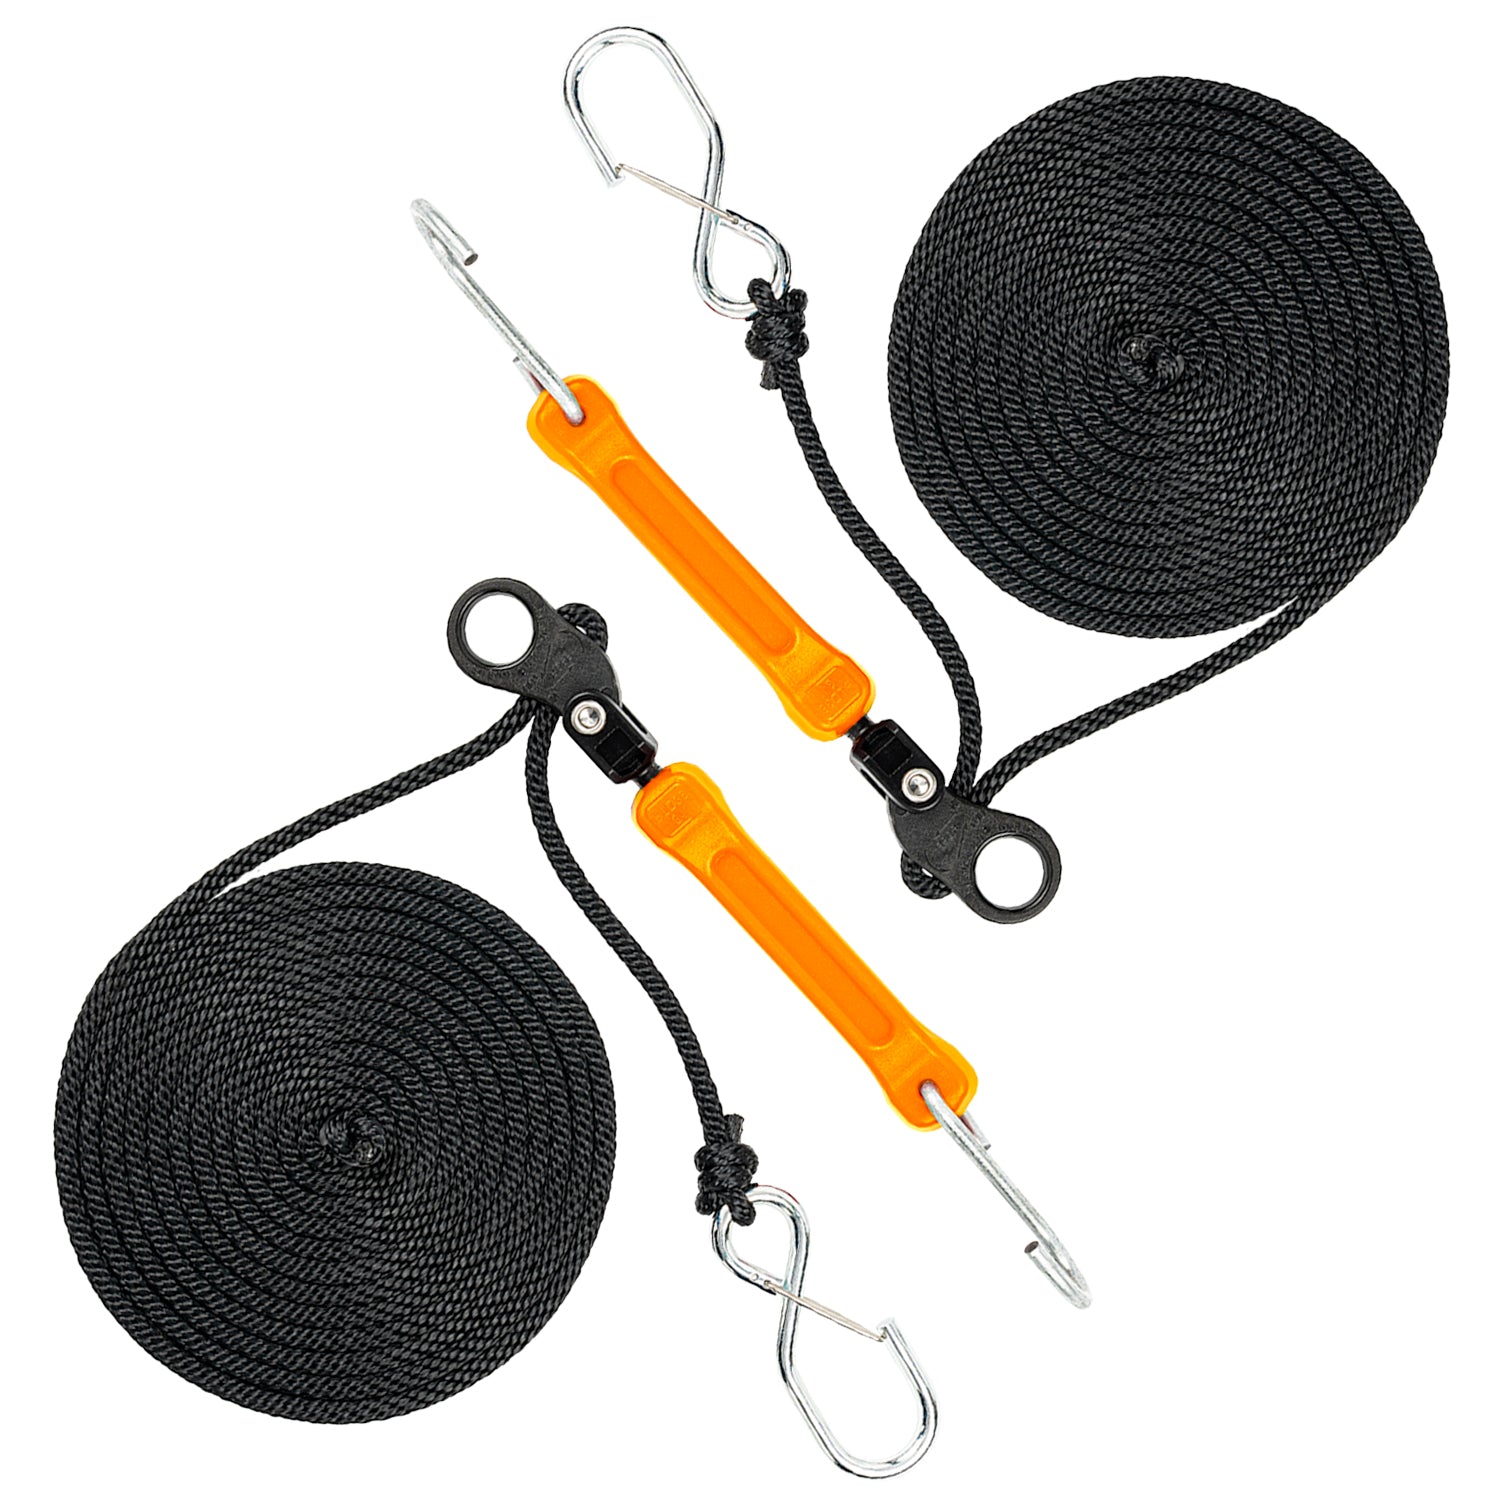 The Perfect Bungee 30 inch The Loop End Cinch Cord with Nylon Hook